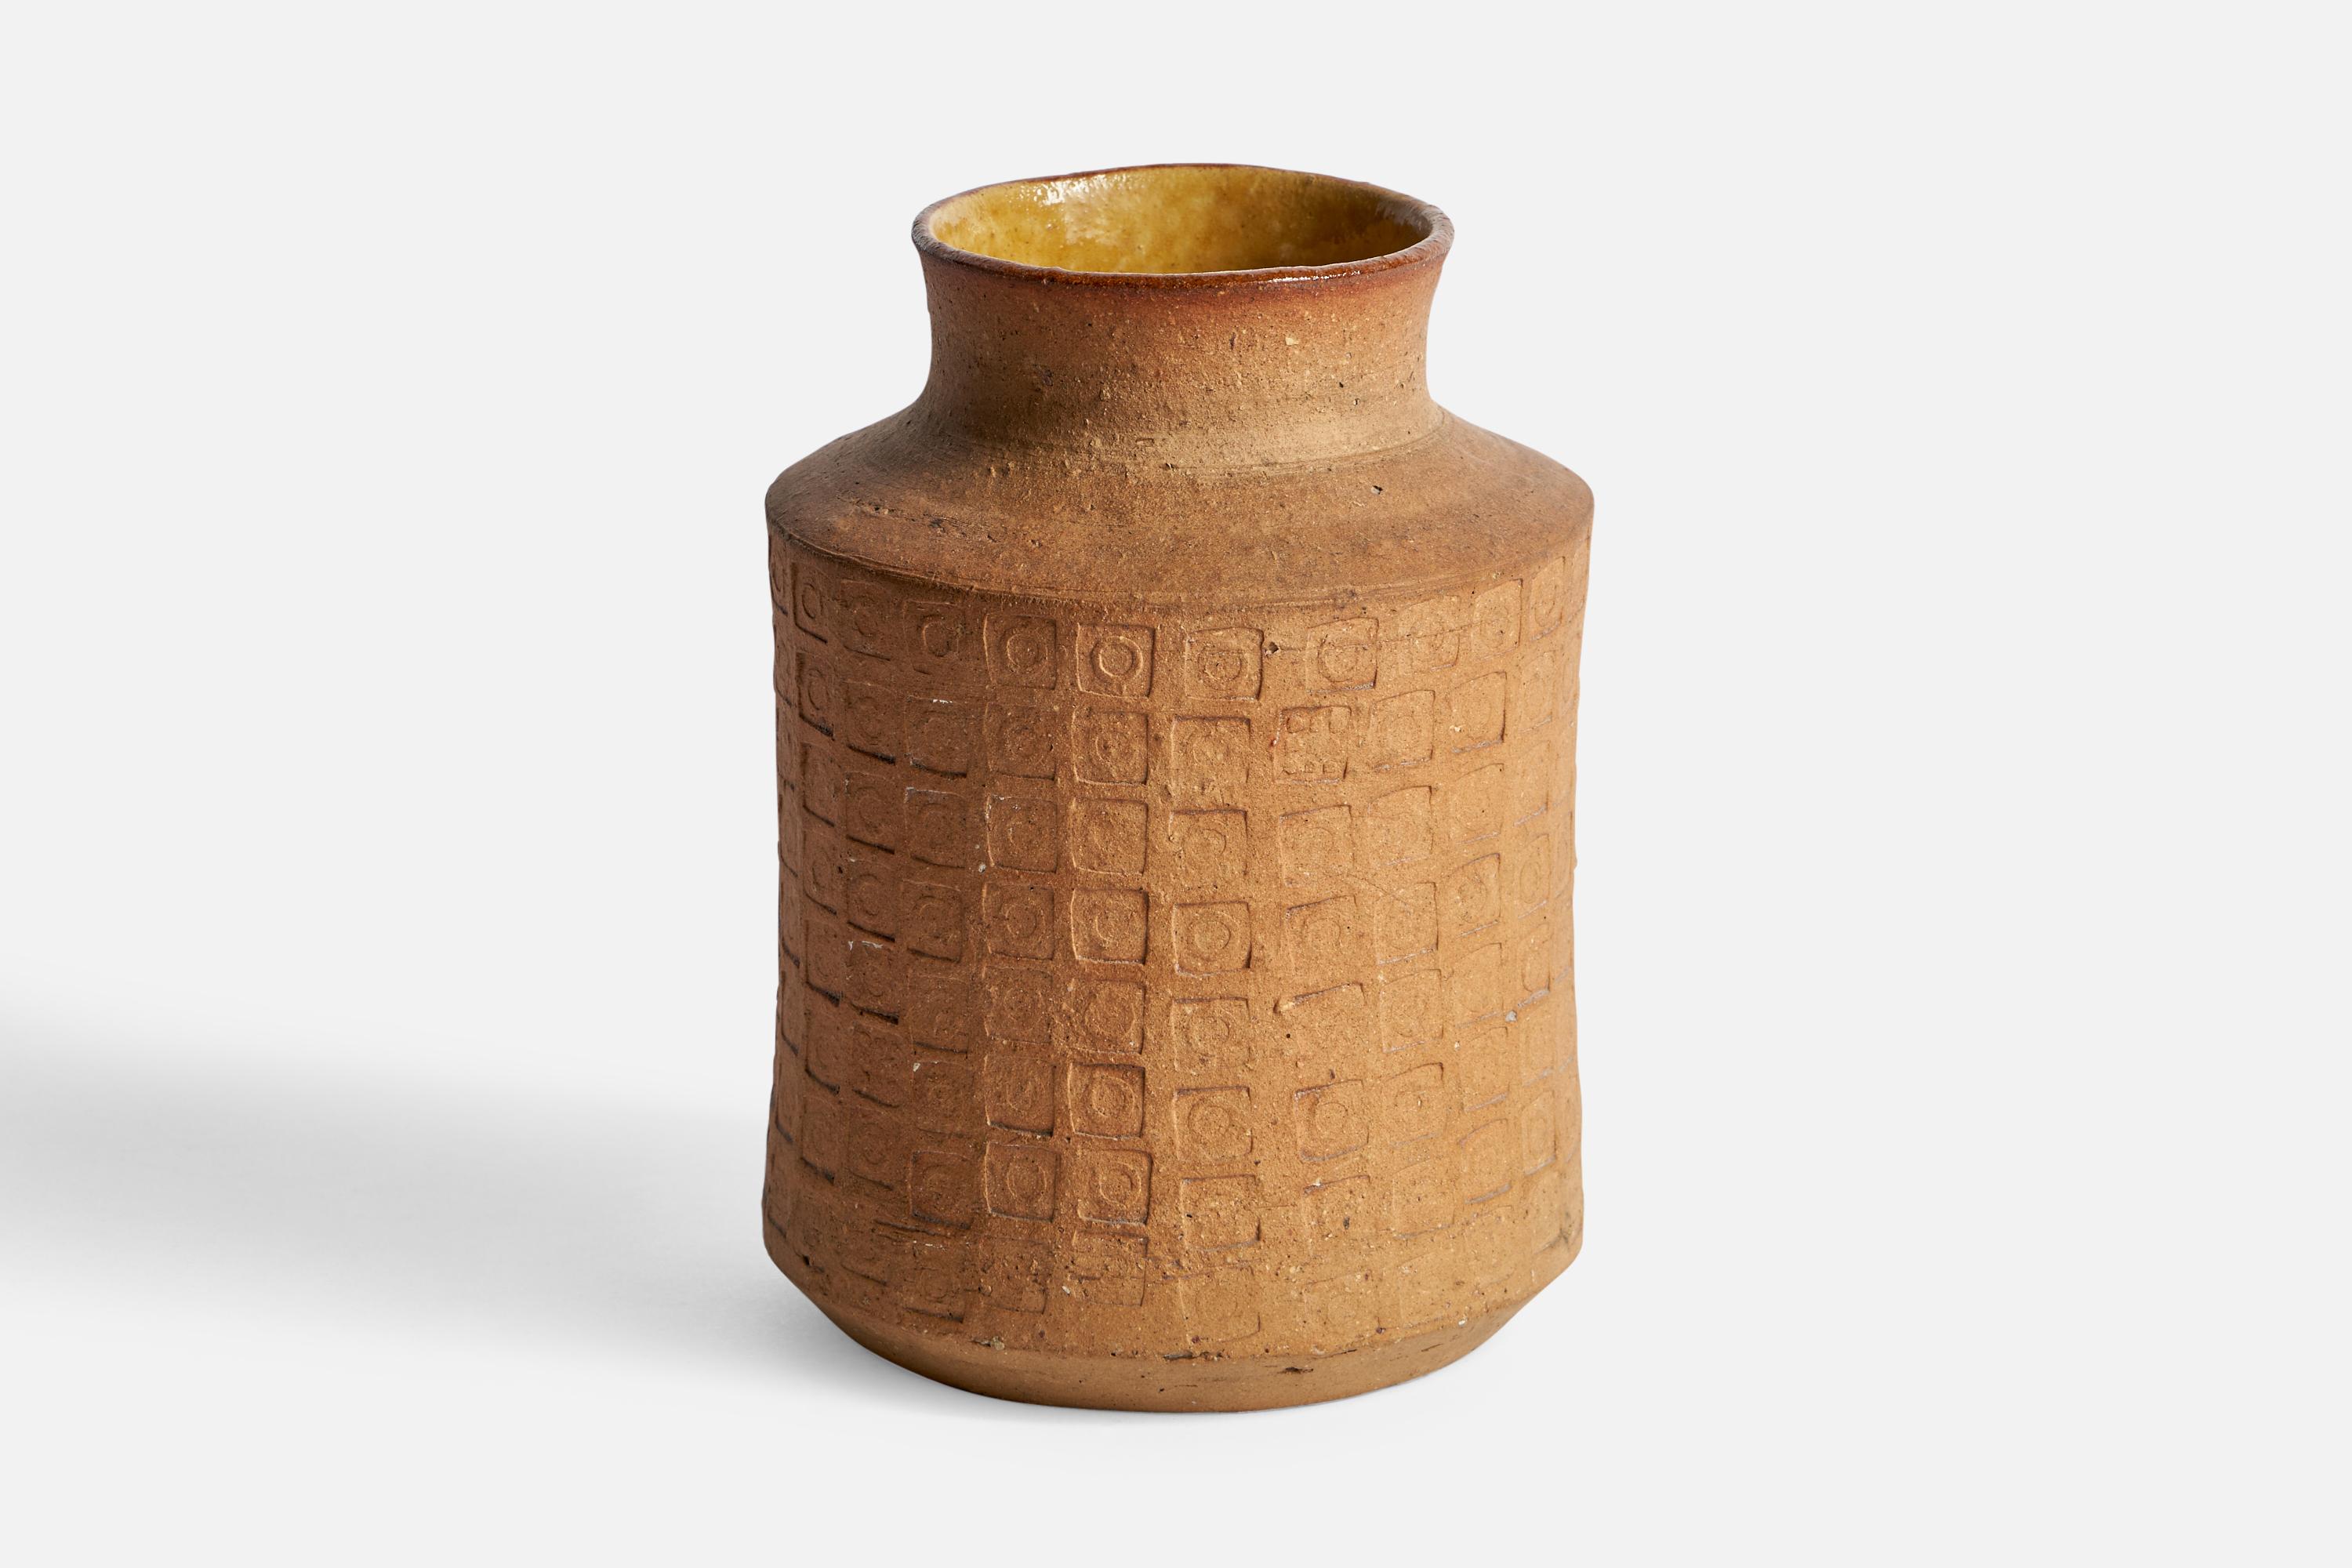 An incised beige ceramic vase designed and produced by Signe Persson-Melin, Sweden, 1953.